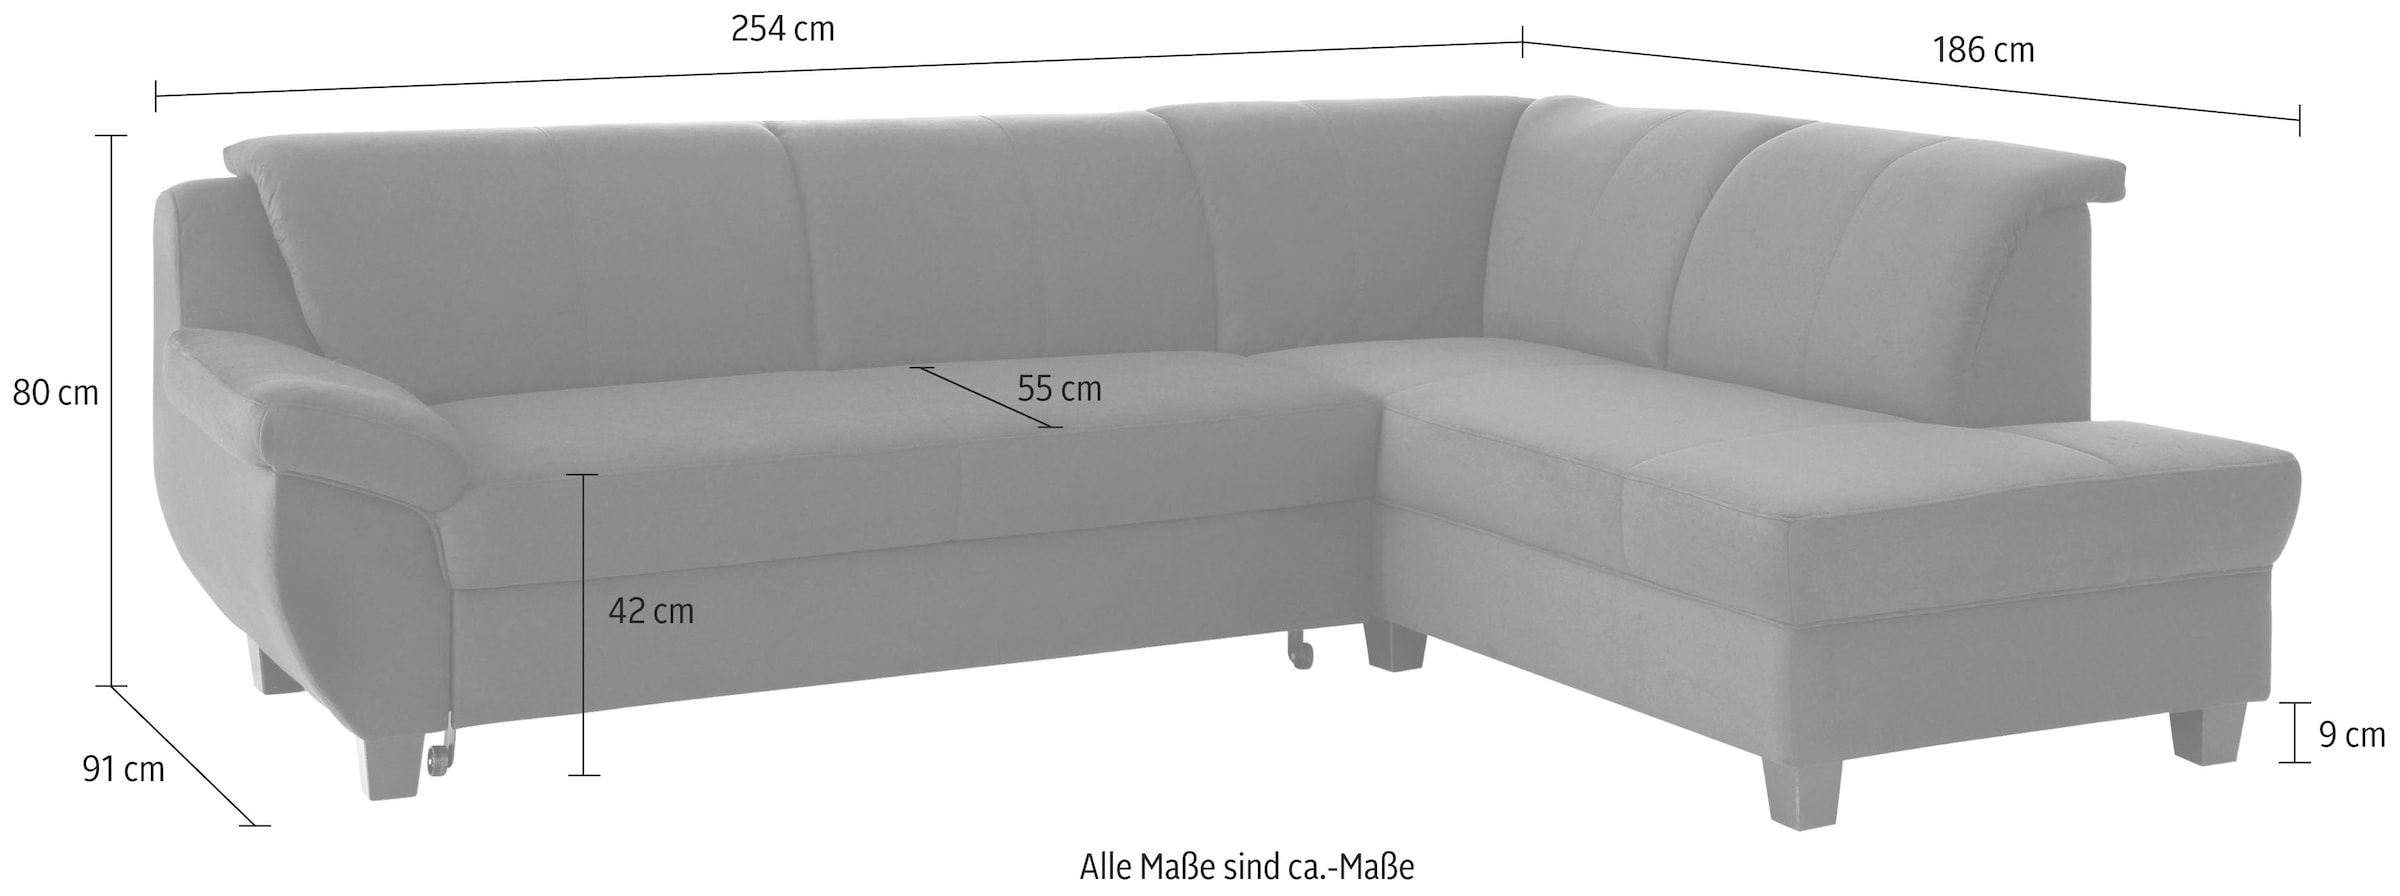 Home affaire Ecksofa »Yesterday L-Form«, wahlweise mit Bettfunktion, auch in Cord